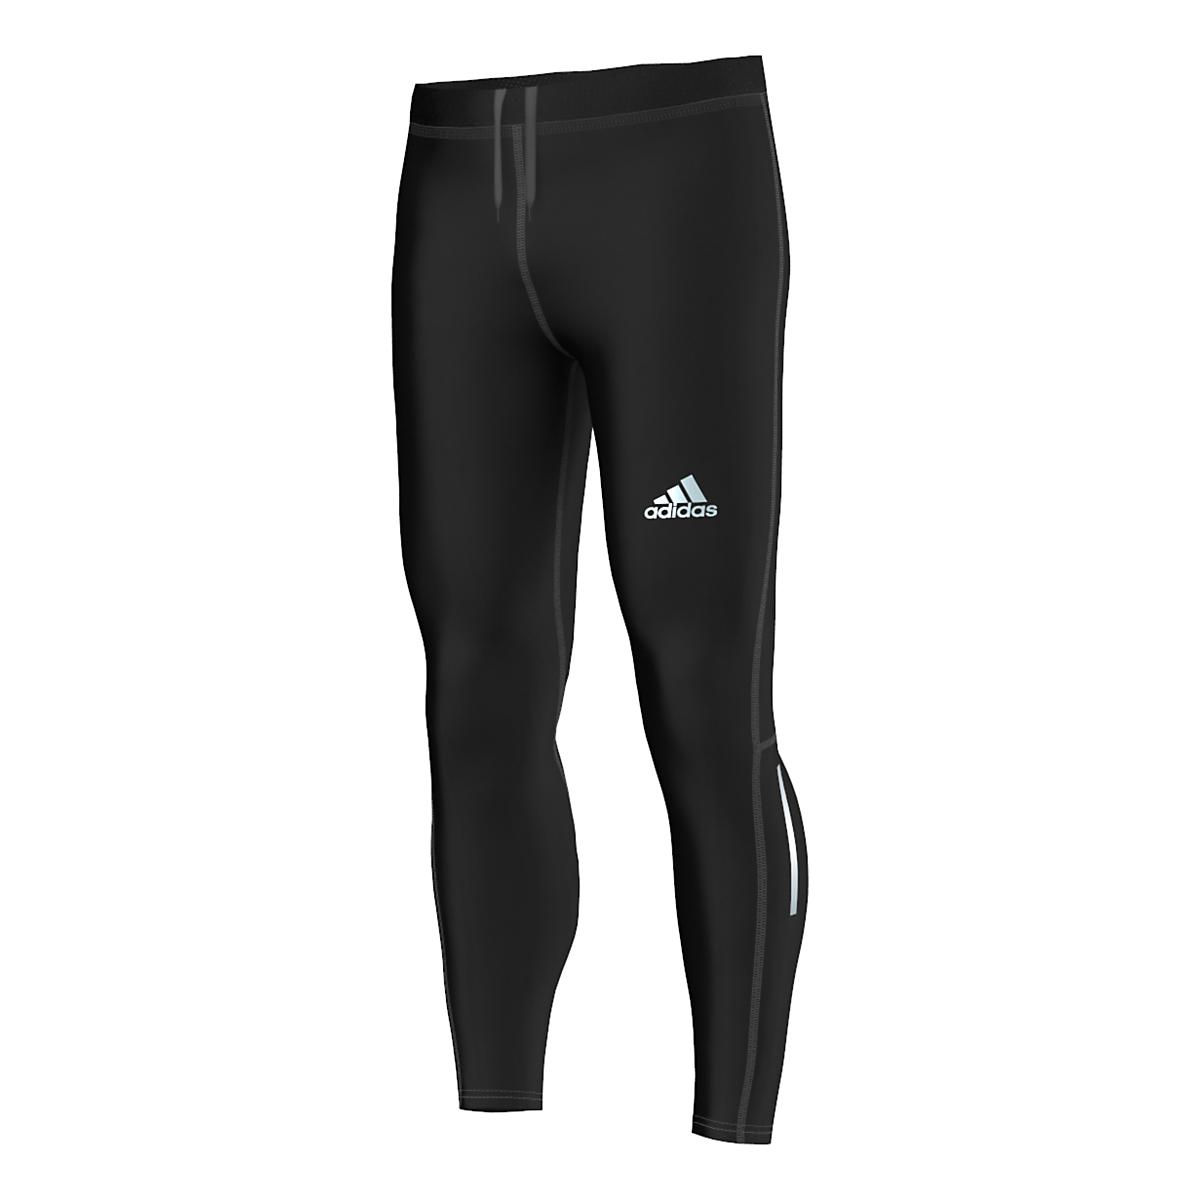 Mens CW-X Insulator Stabilyx Fitted Tights at Road Runner Sports